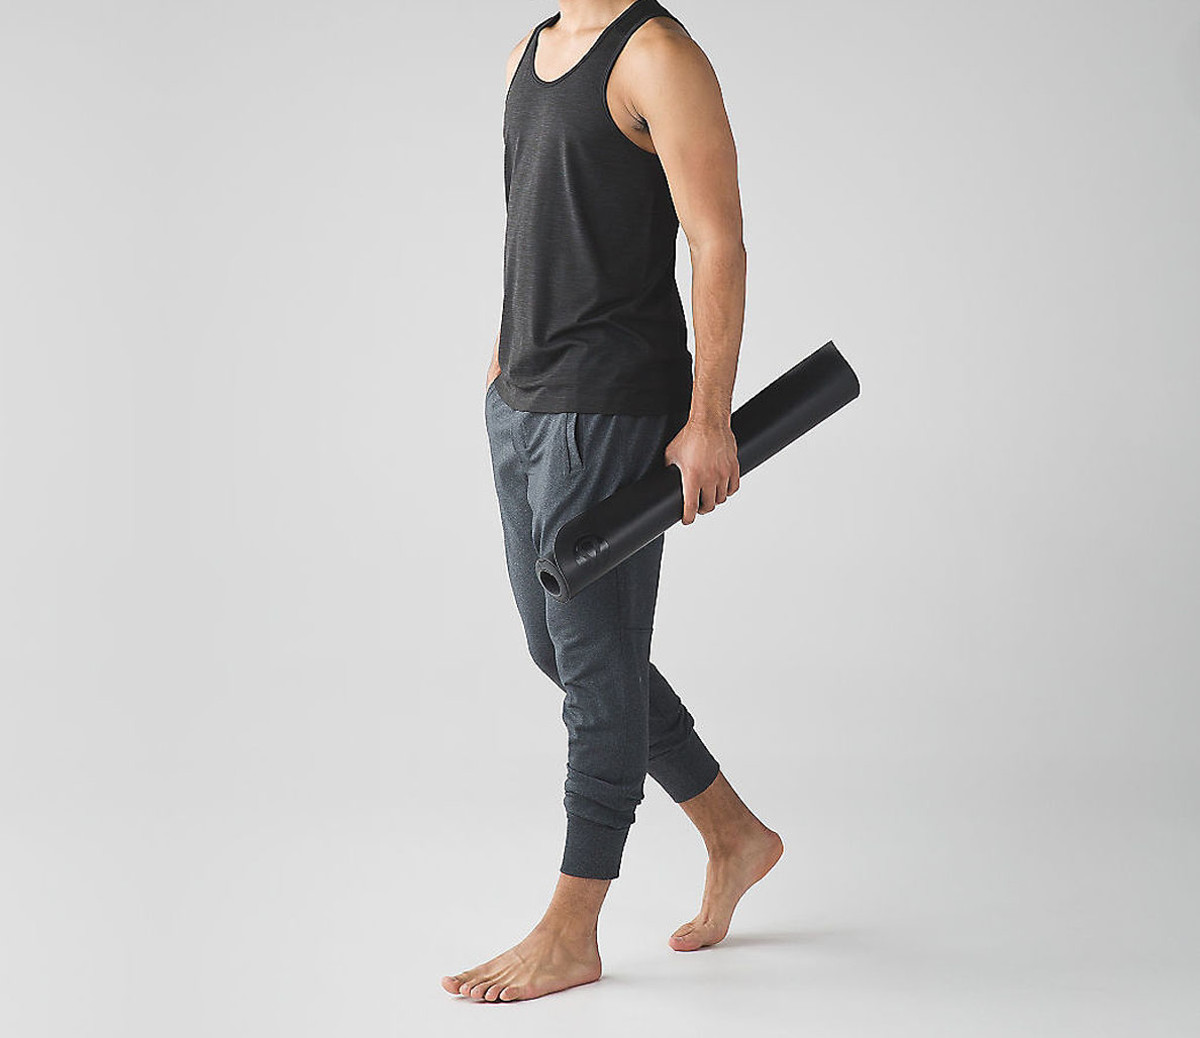 Men's Yoga Clothing - What a Man Needs - DoYou